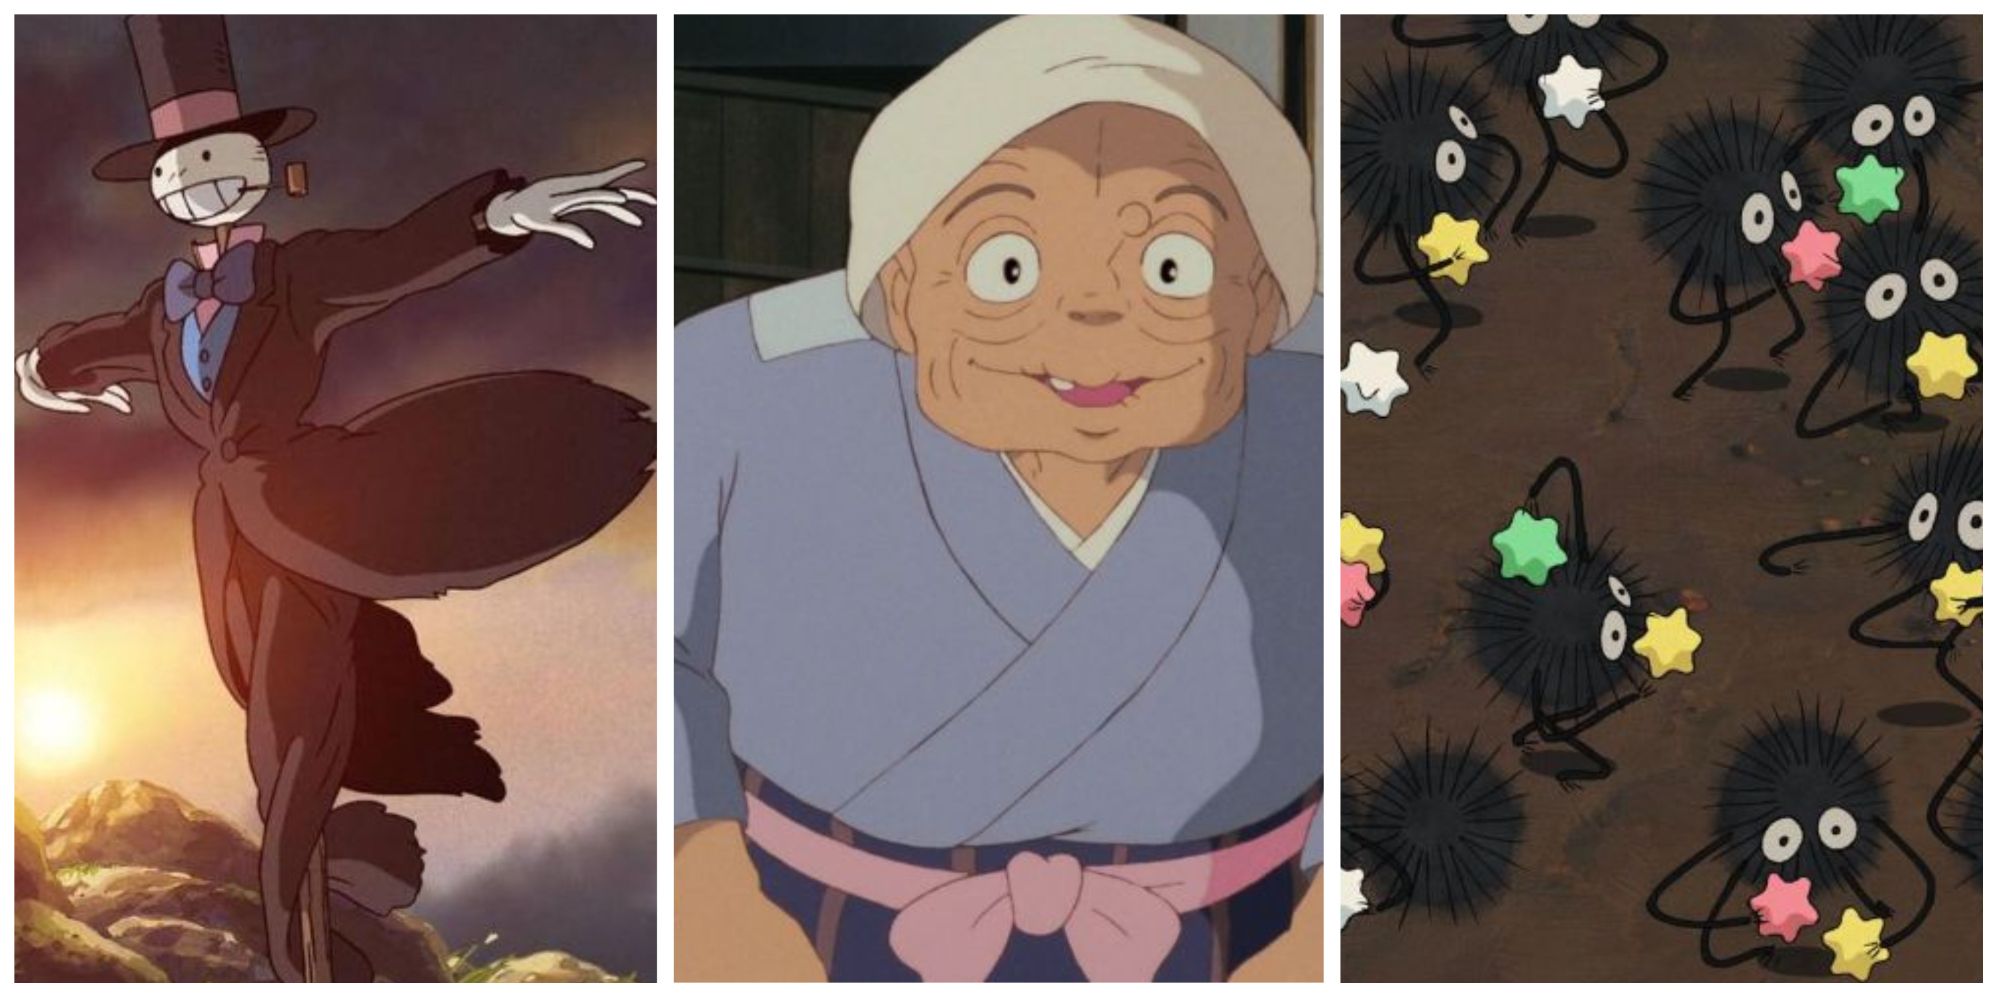 Turniphead from Howls Moving Castle. Granny from My Neighbor Totoro. Soot Sprites from Spirited Away.